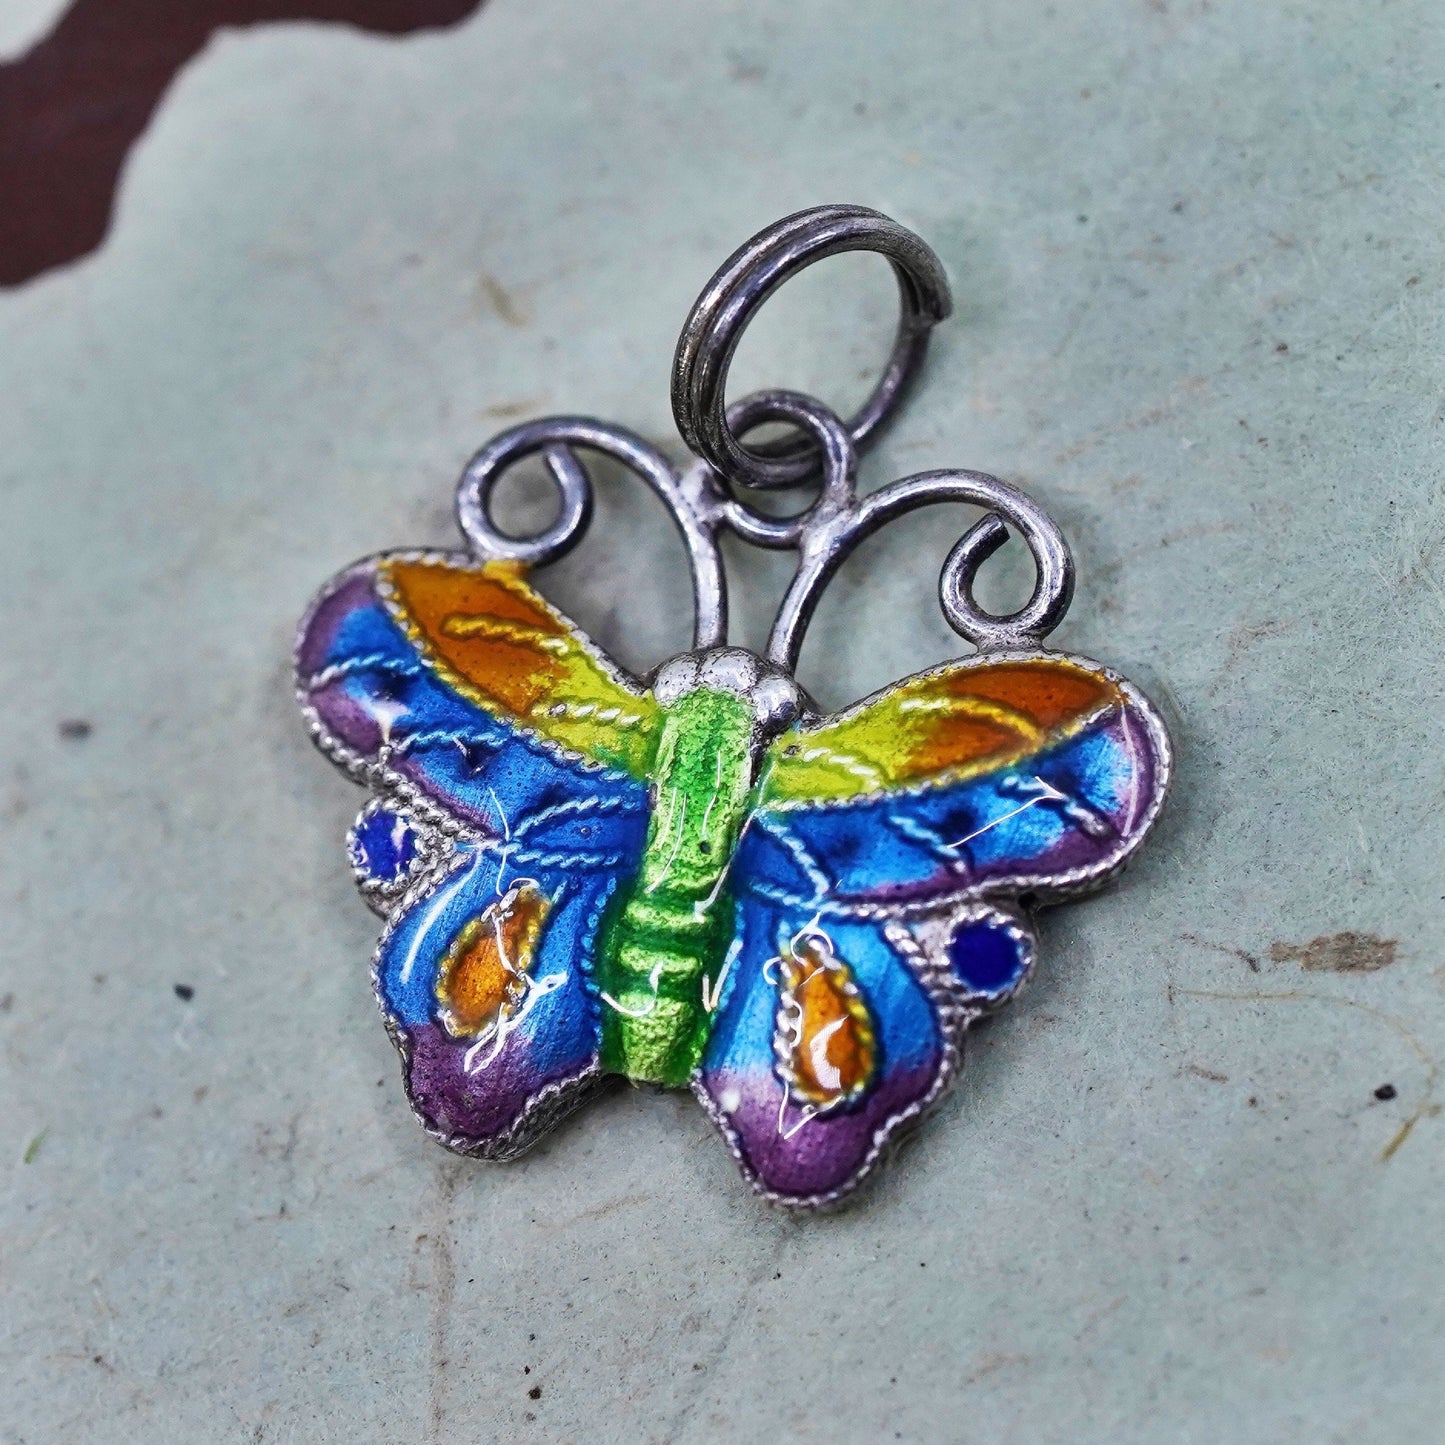 Vintage sterling silver handmade pendant, 925 colorful enamel butterfly charm